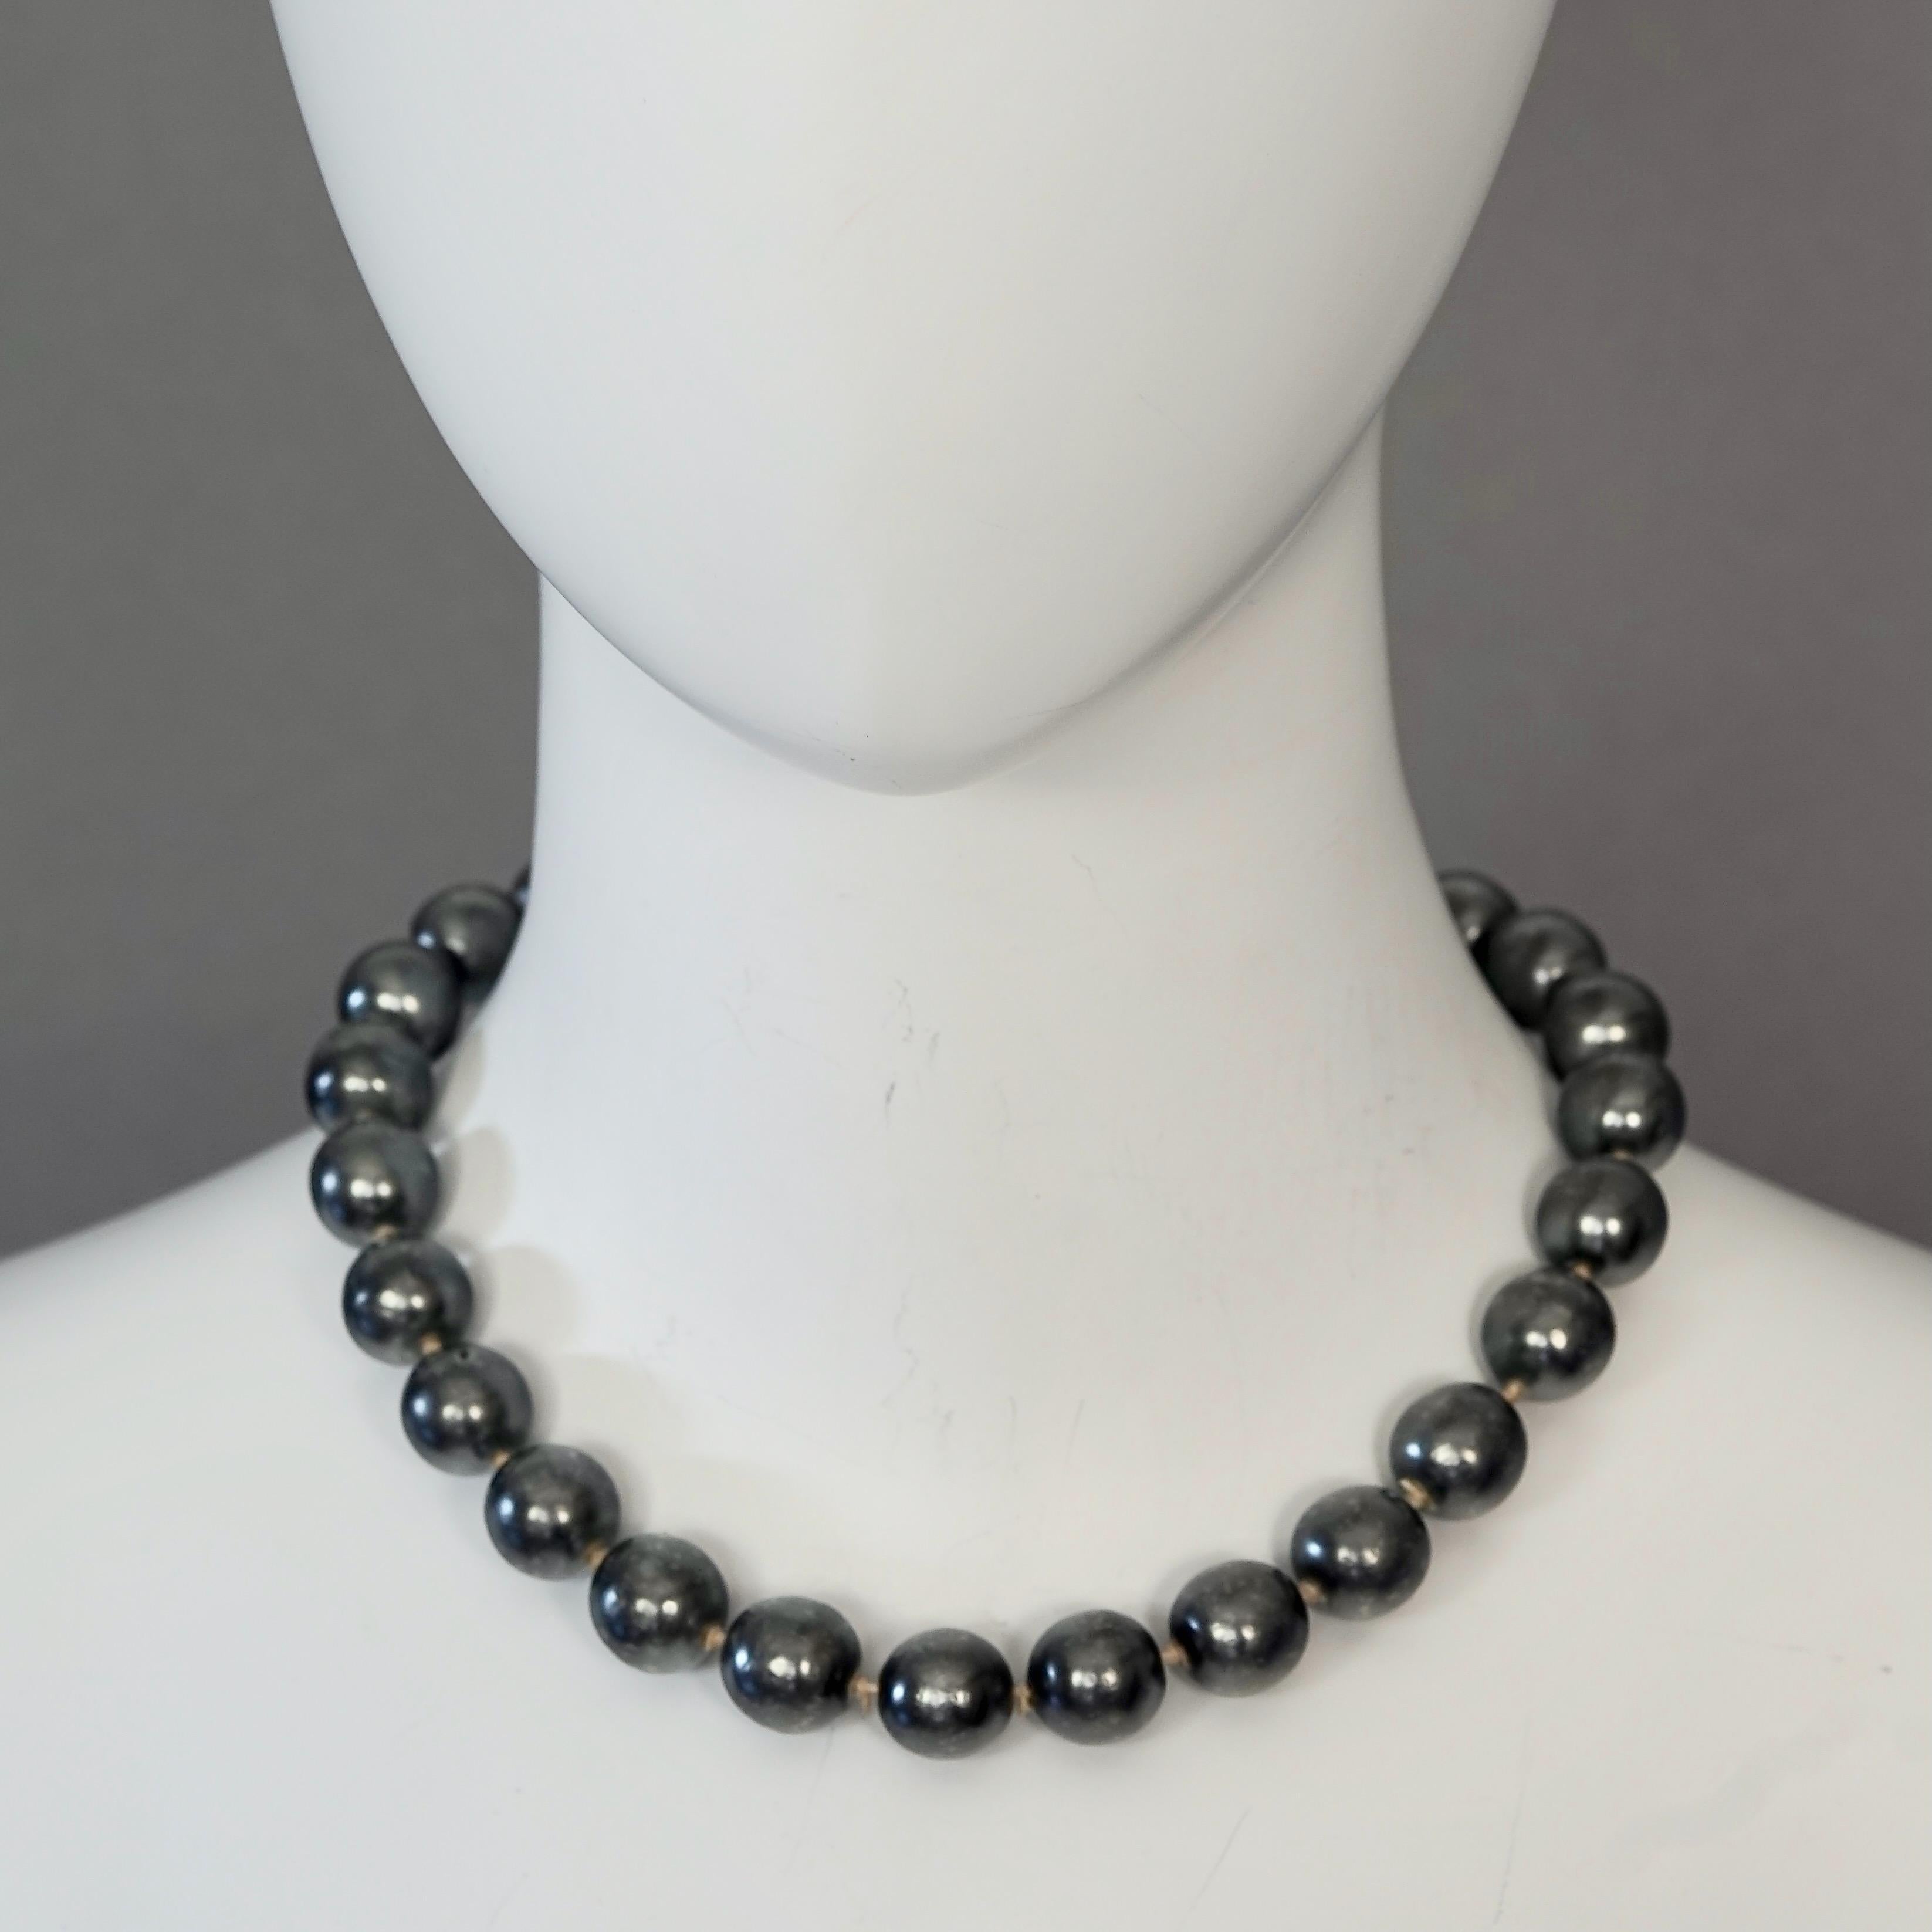 Vintage 1975 CHRISTIAN DIOR Silver Grey Glass Pearl Necklace

Measurements:
Pearls Diameter: 0.55 inch (1.4 cm)
Wearable Length: 17.12 inches (43.5 cm)

Features:
- 100% Authentic KARL LAGERFELD.
- Silver grey glass pearl choker necklace.
- Gold